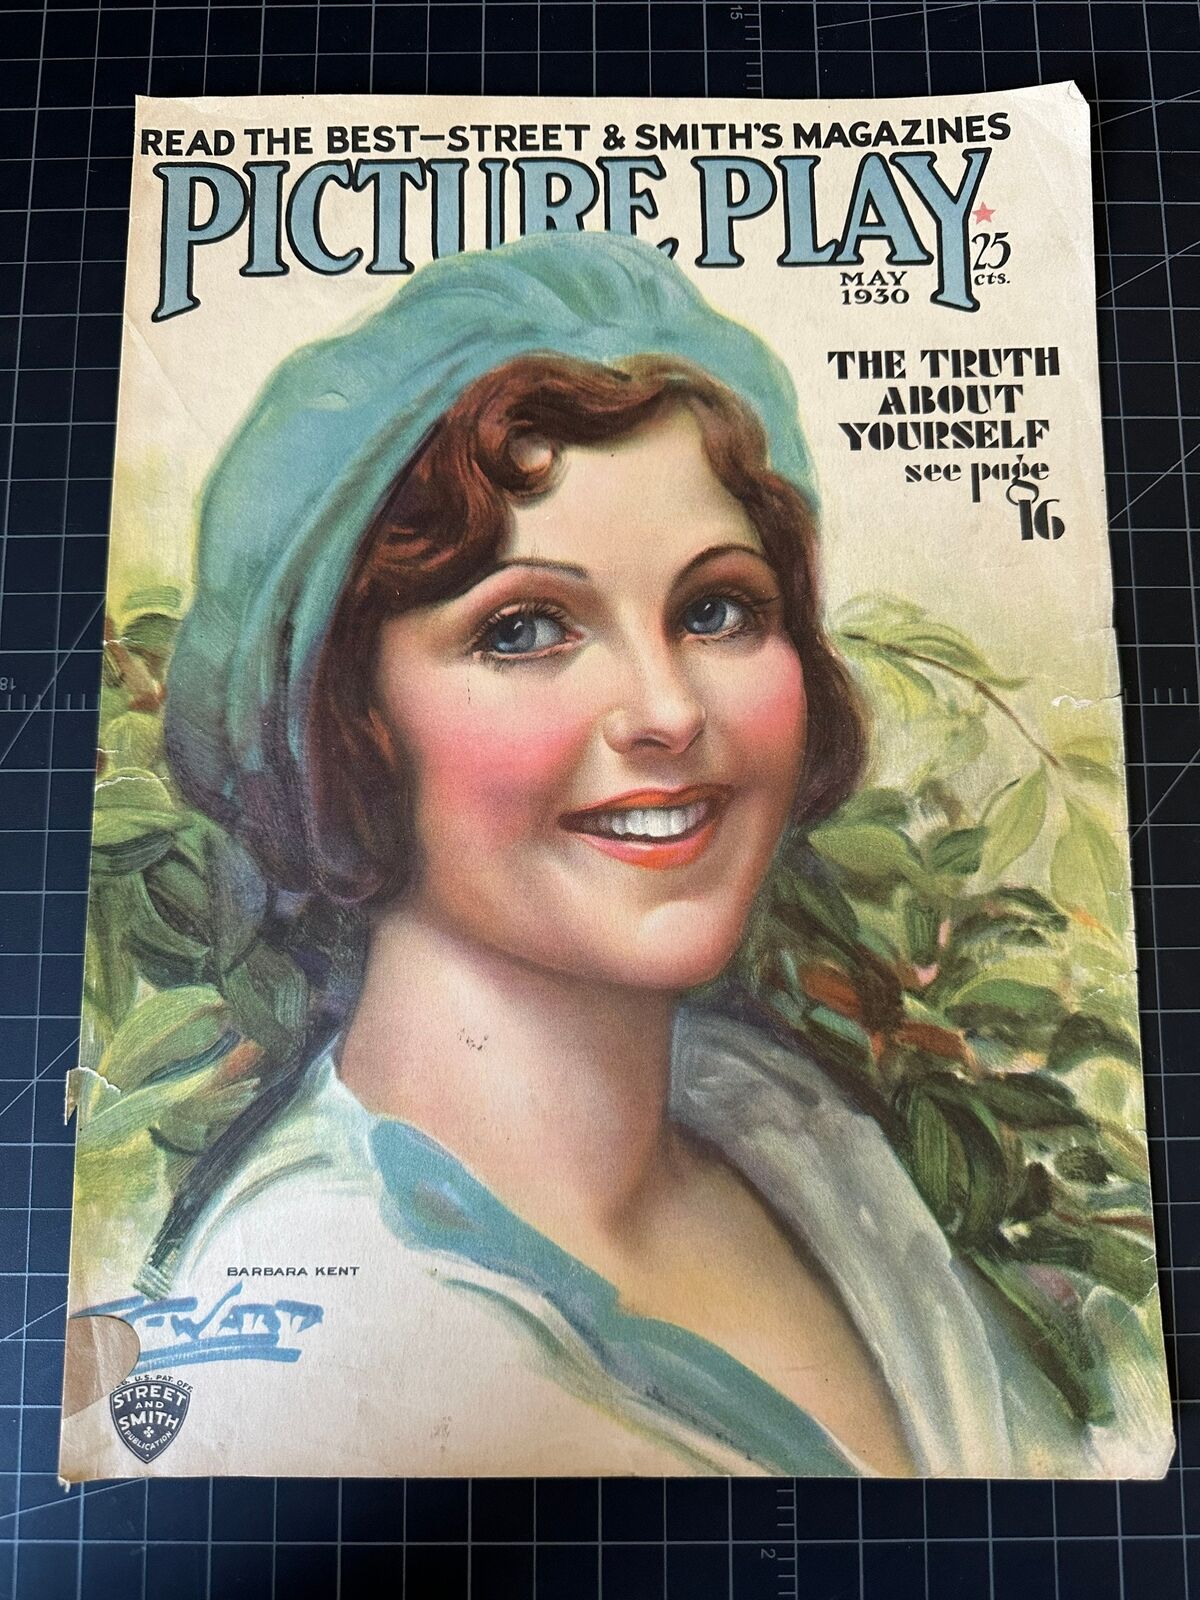 Vintage 1930 Picture Play Magazine Cover - Barbara Kent